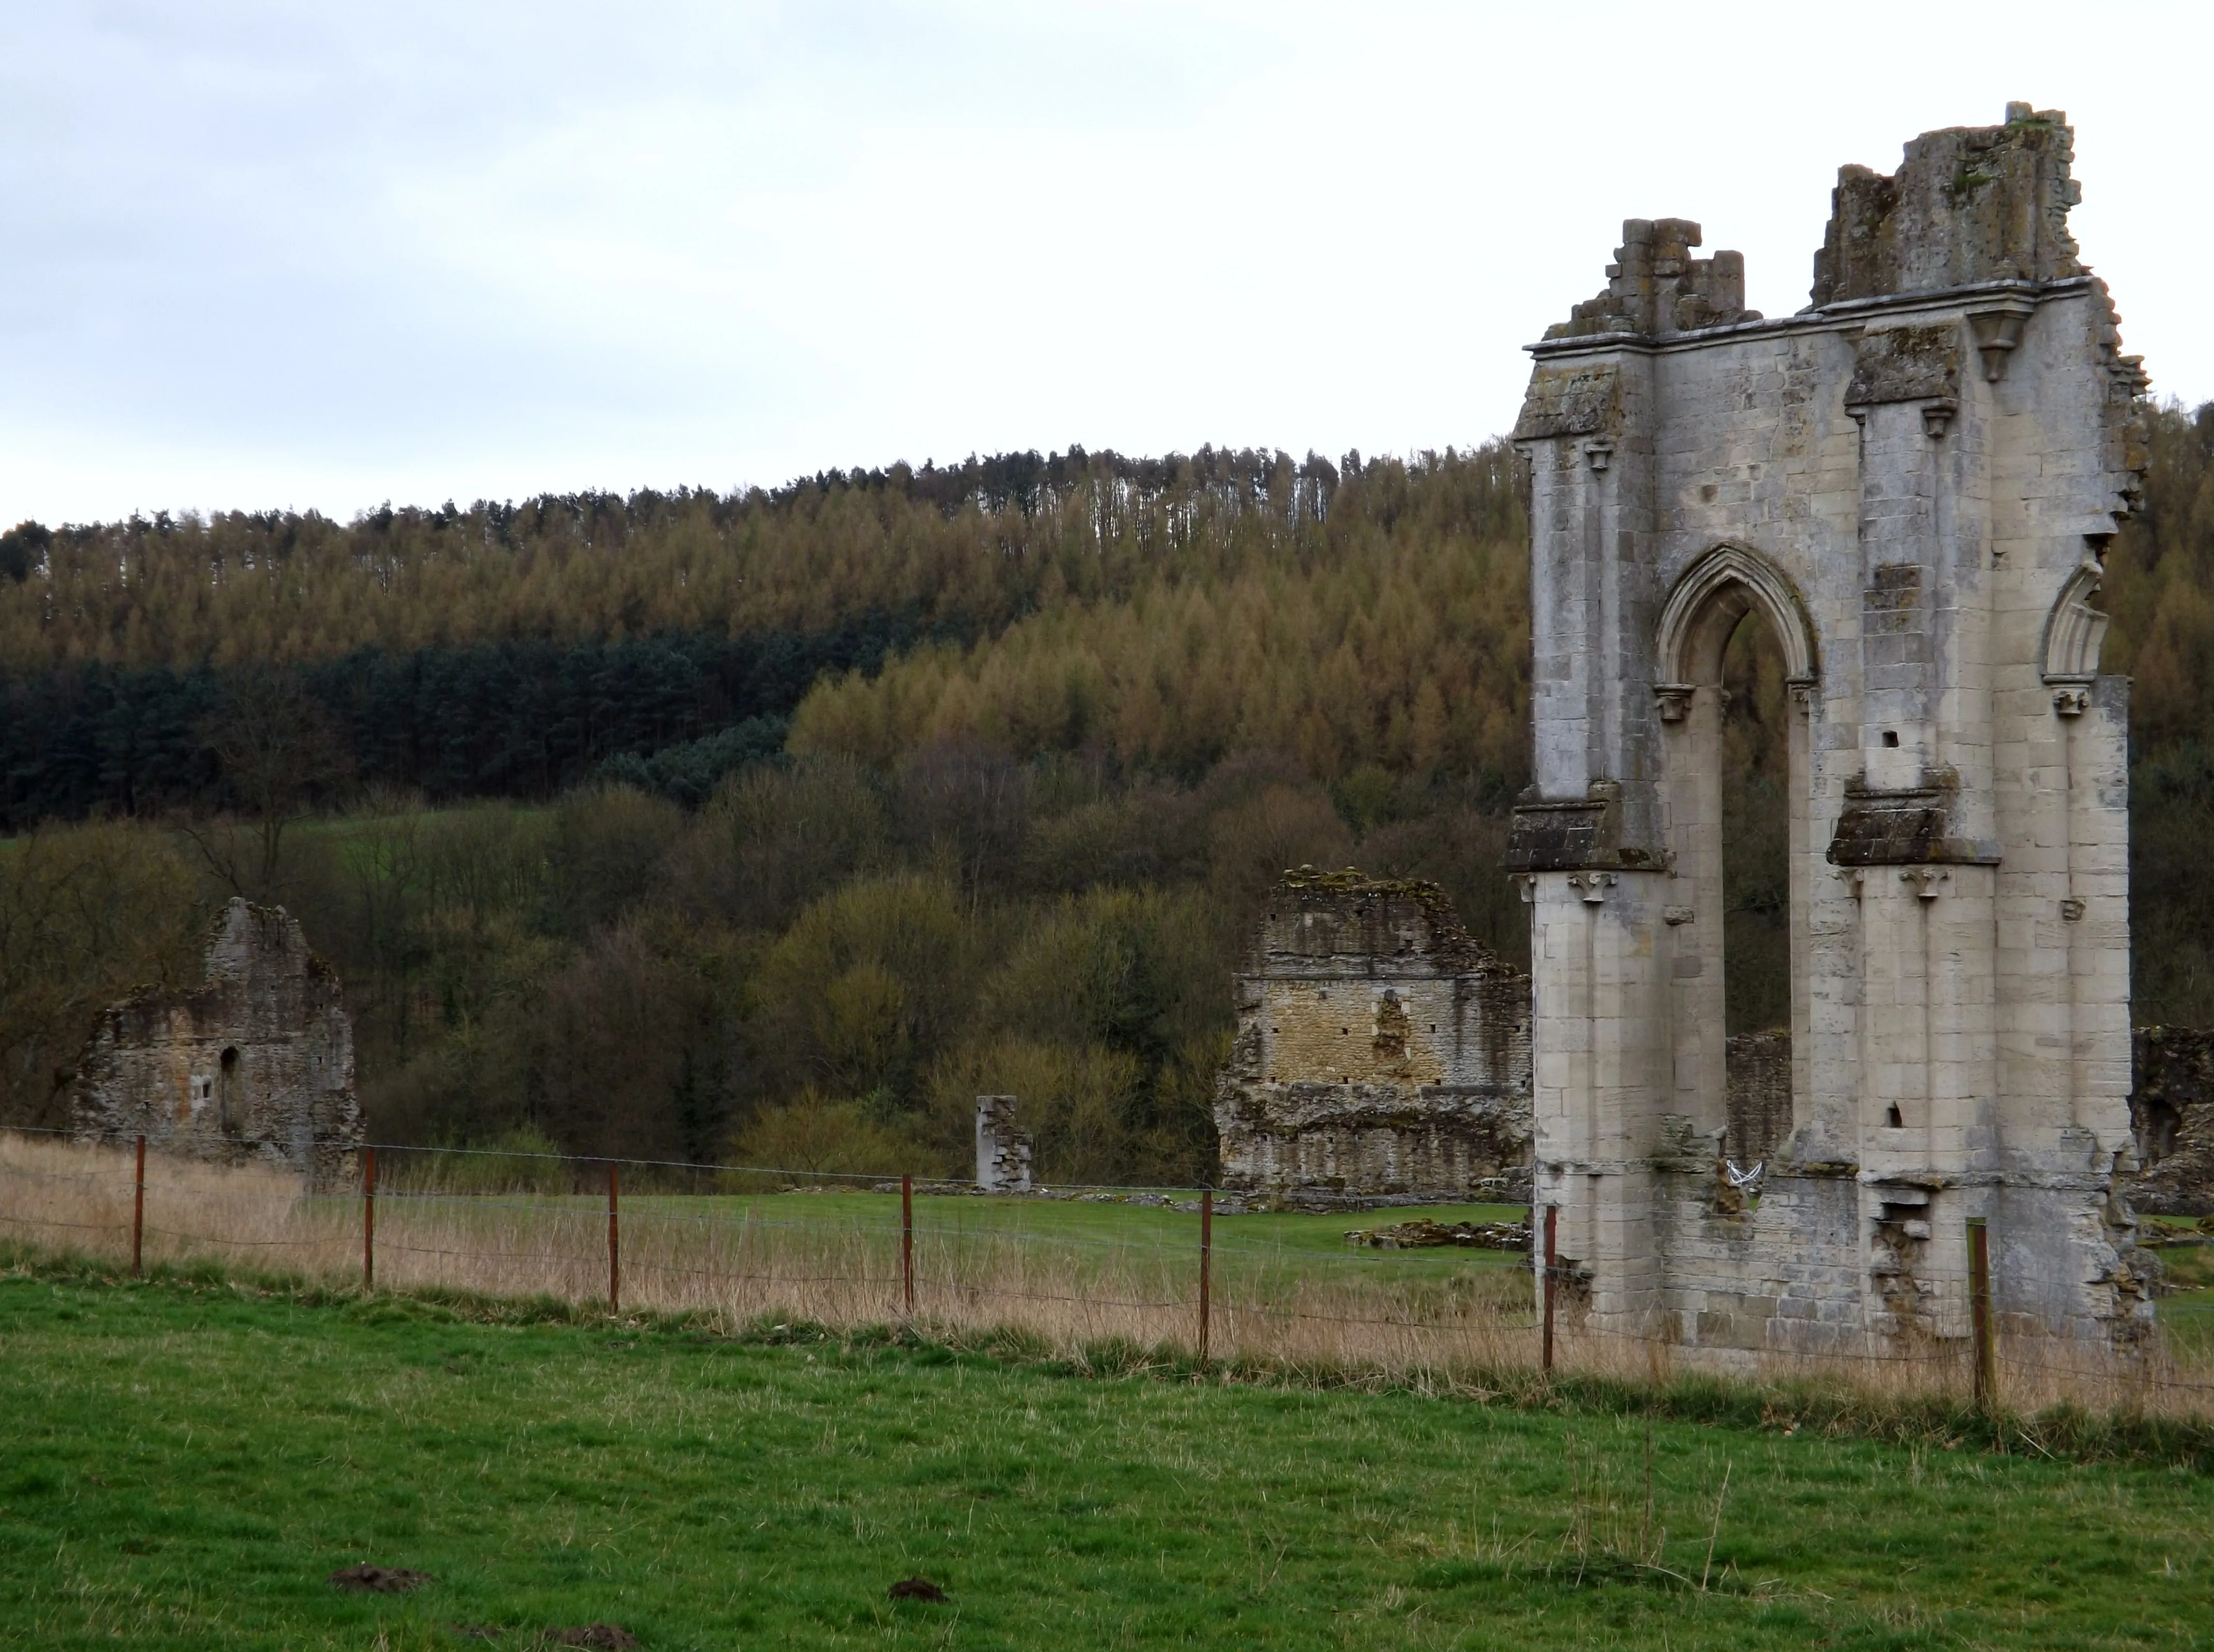 Photograph of Kirkham Priory, Yorkshire Wolds